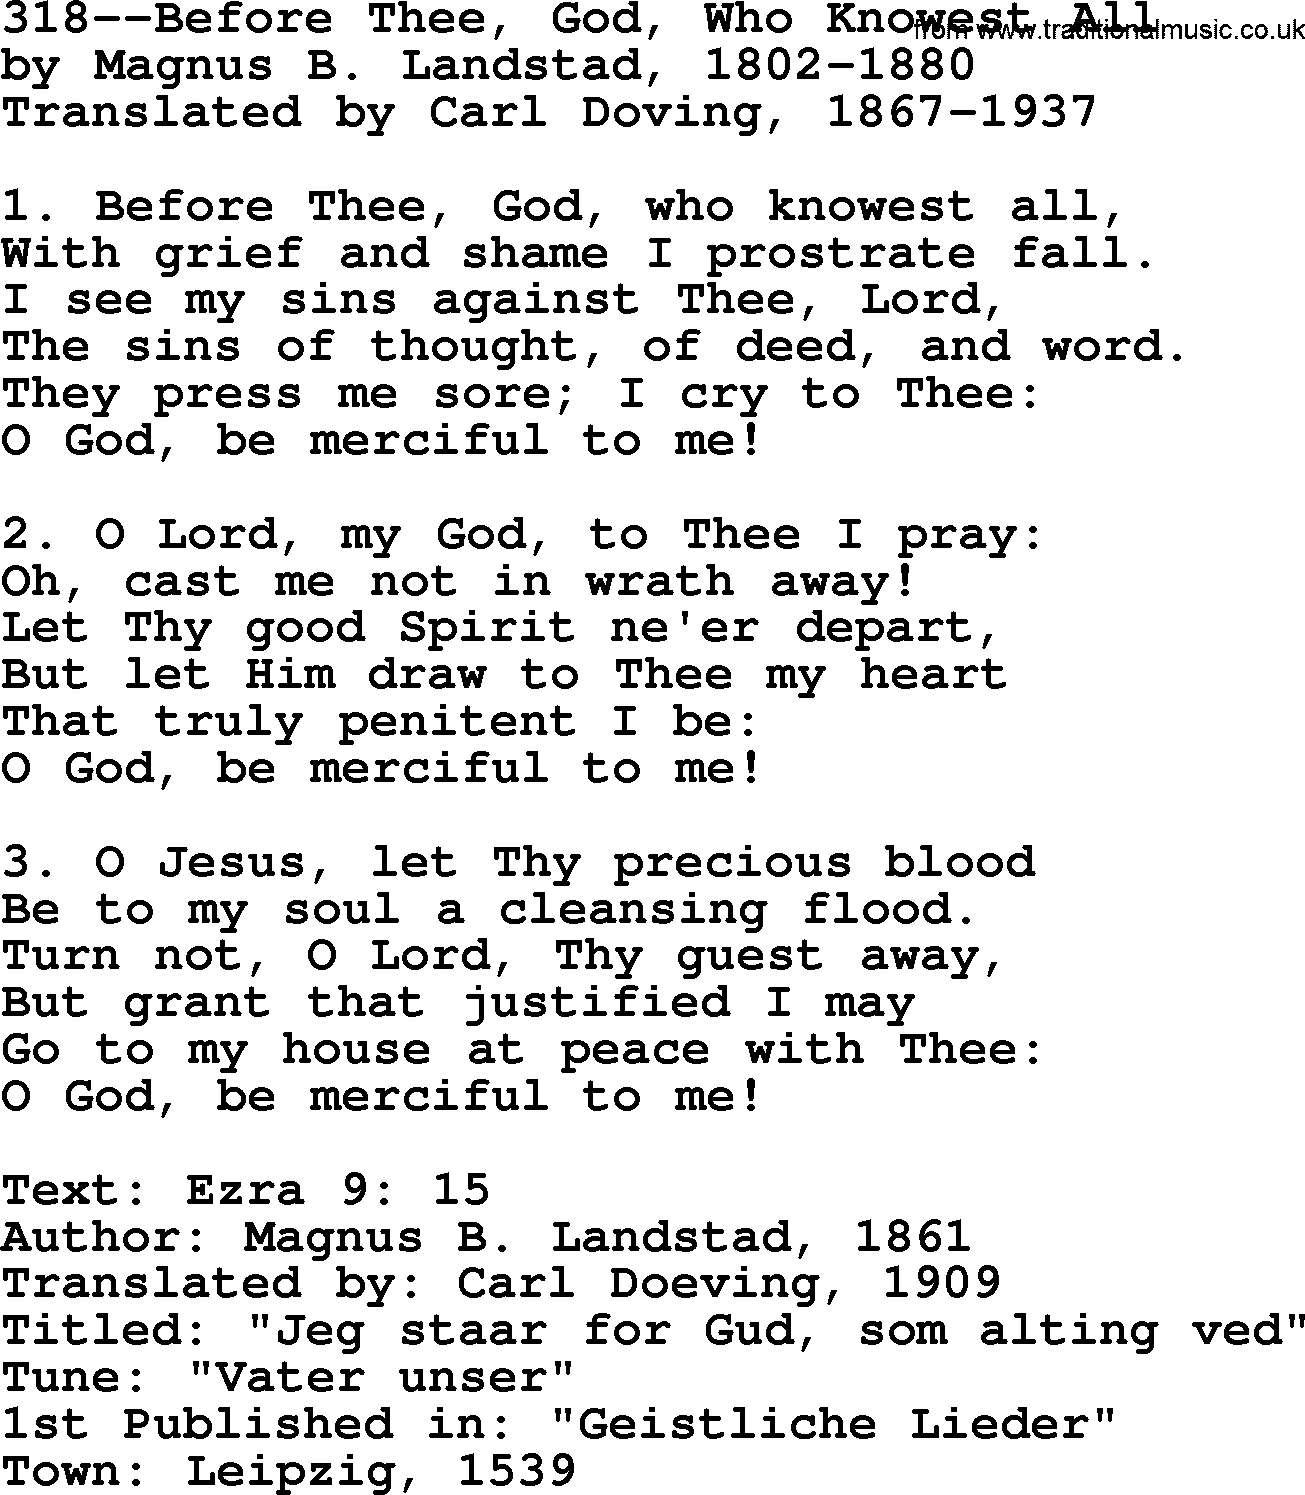 Lutheran Hymn: 318--Before Thee, God, Who Knowest All.txt lyrics with PDF